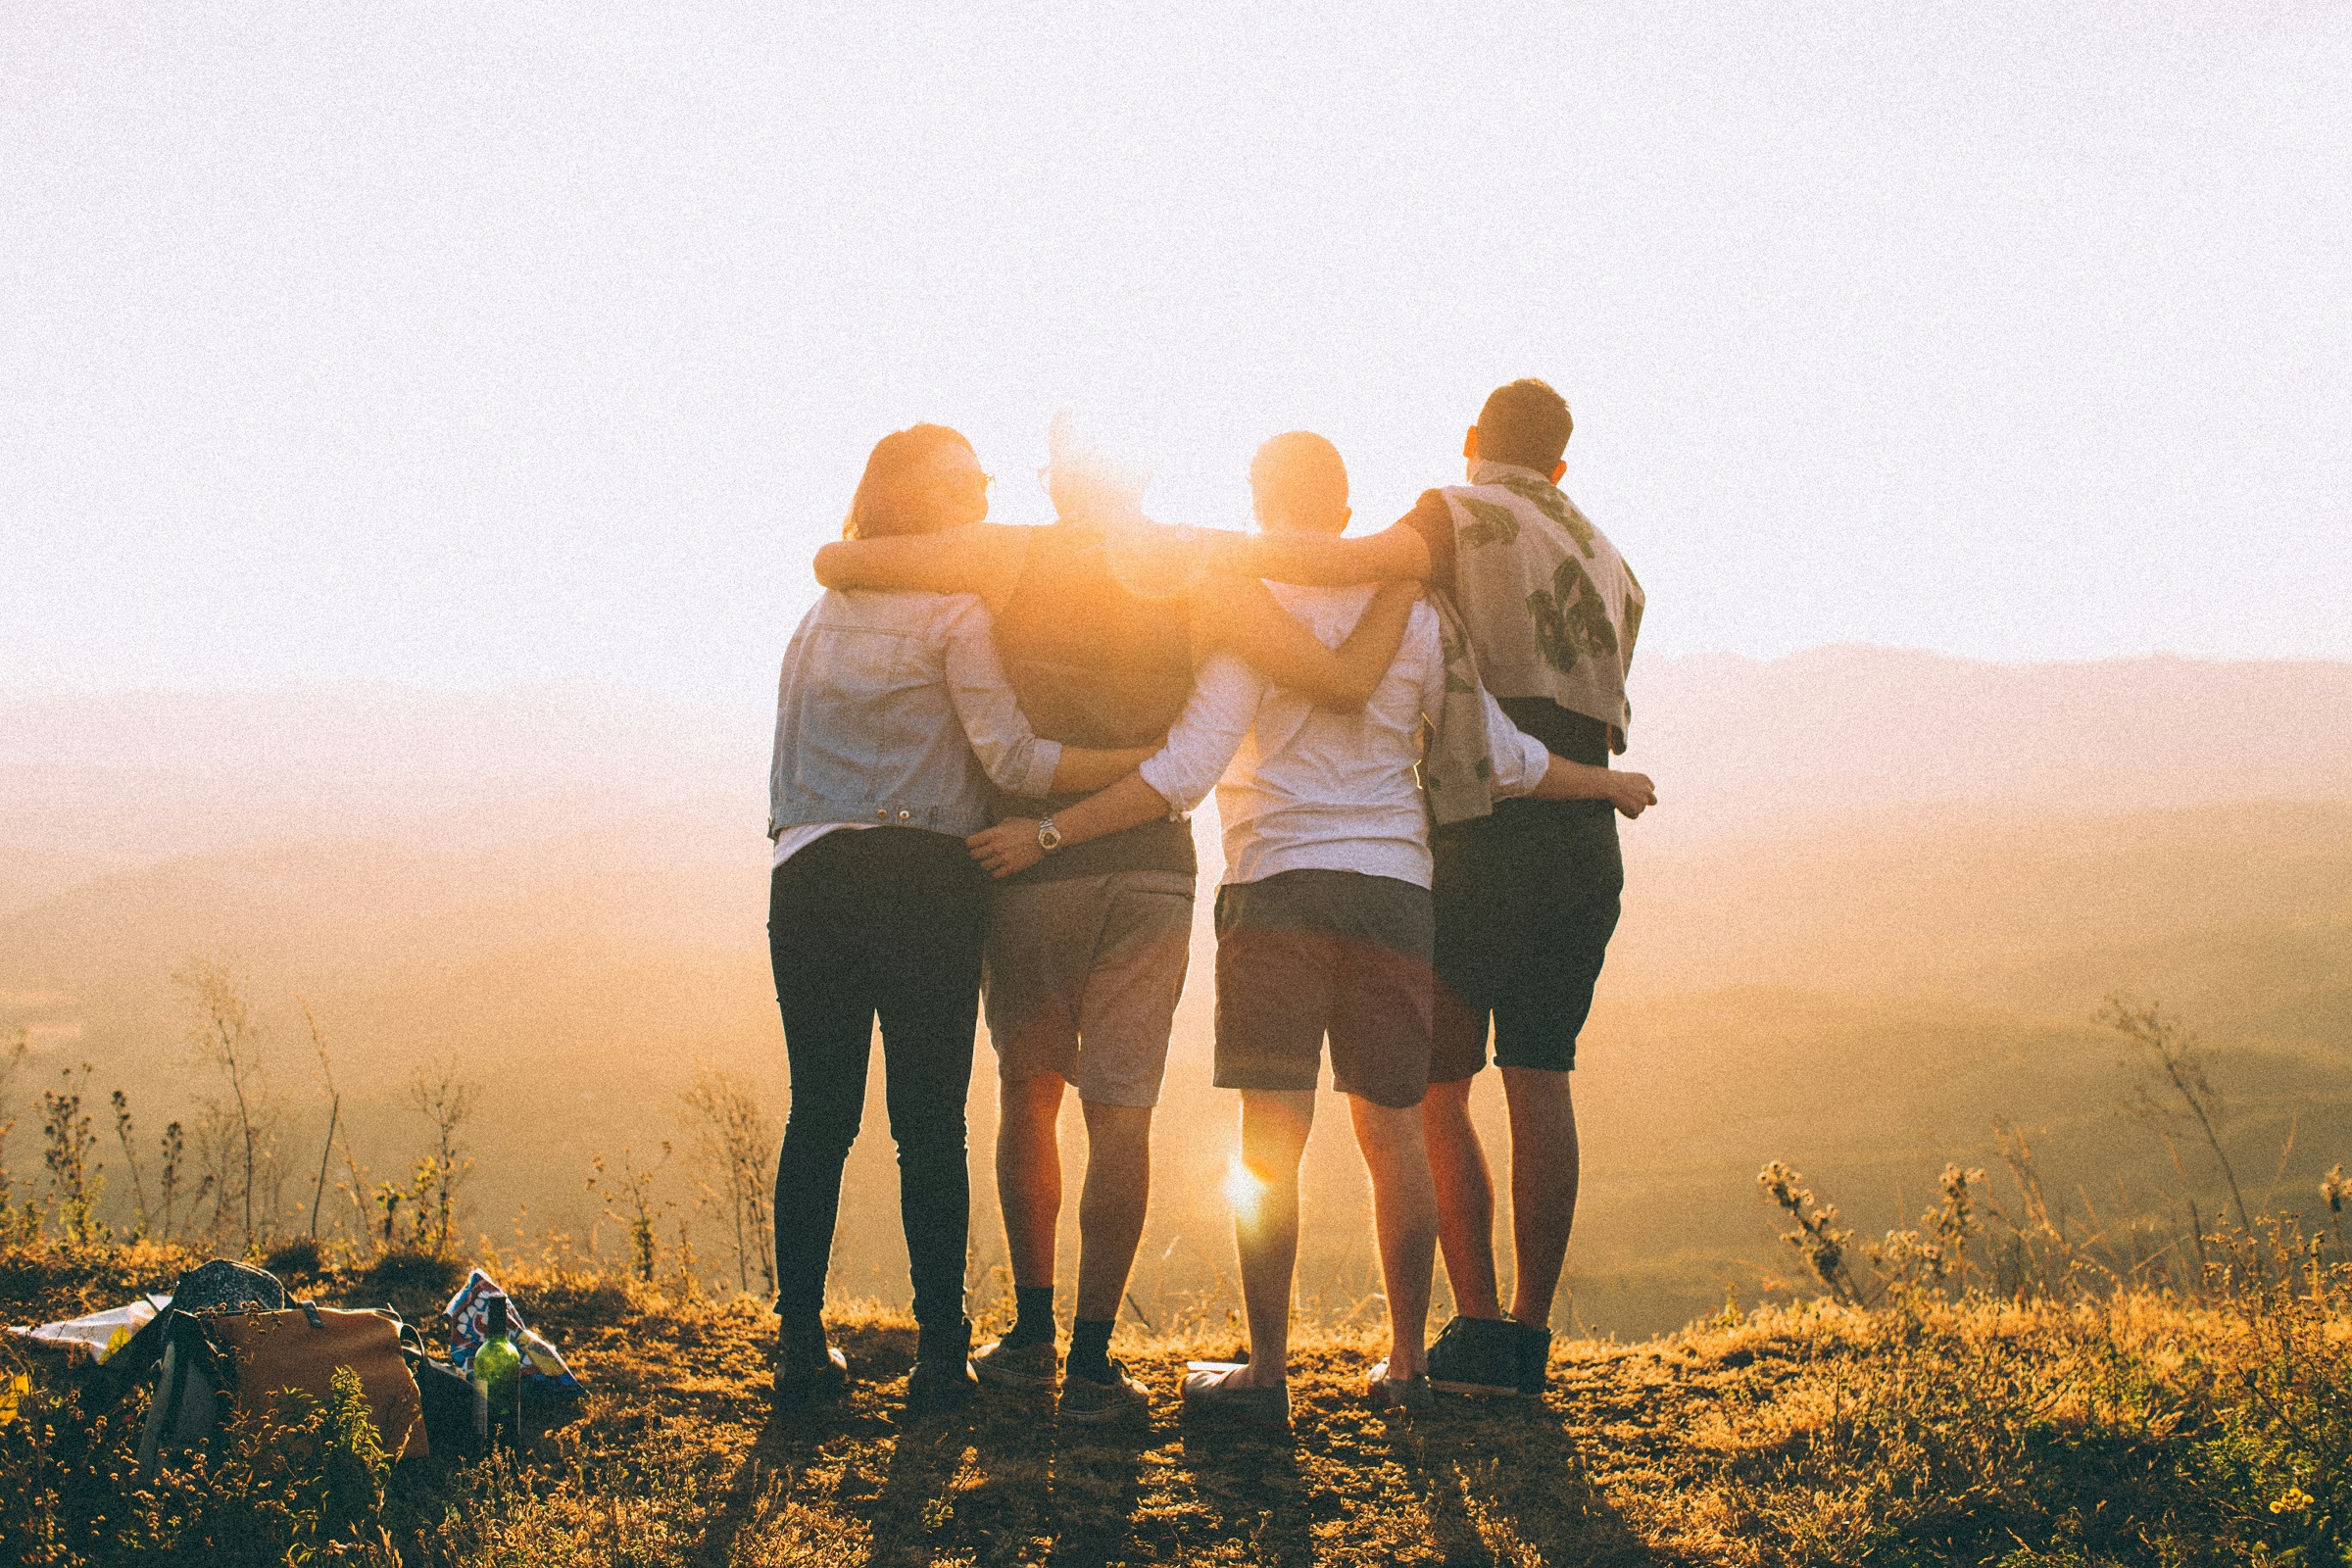 Four people stand together on the edge of a hill and look out over nearby hills as the sun set.